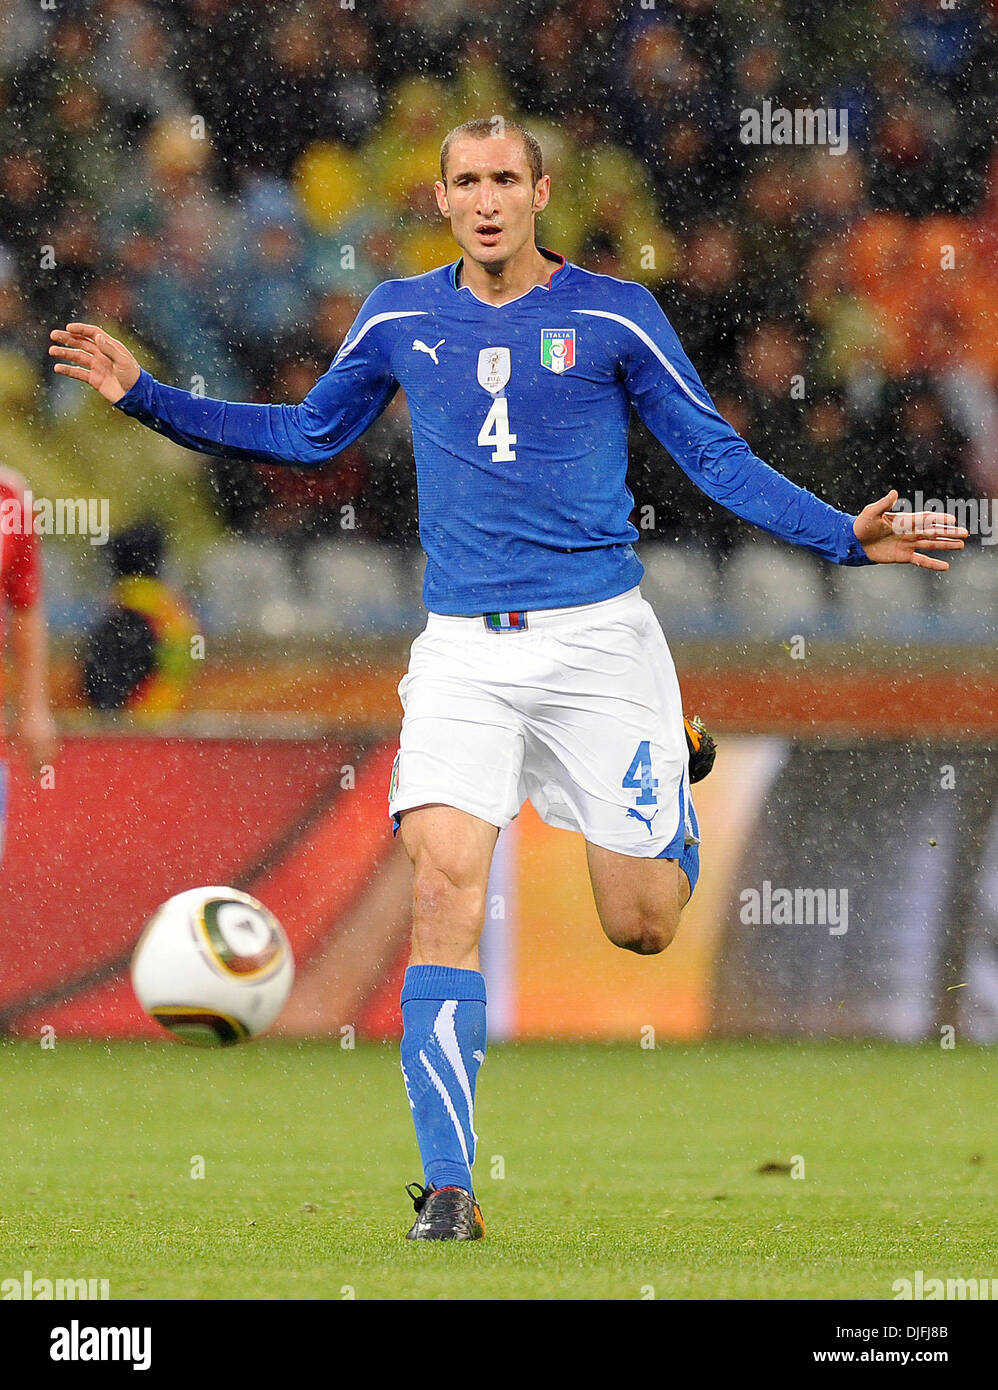 Jun 14, 2010 - Cape Town, South Africa - GIORGIO CHIELLINI of Italy during the FIFA World Cup 2010 soccer match between Italy and Paraguay at the Green Point Stadium. (Credit Image: © Luca Ghidoni/ZUMApress.com) Stock Photo